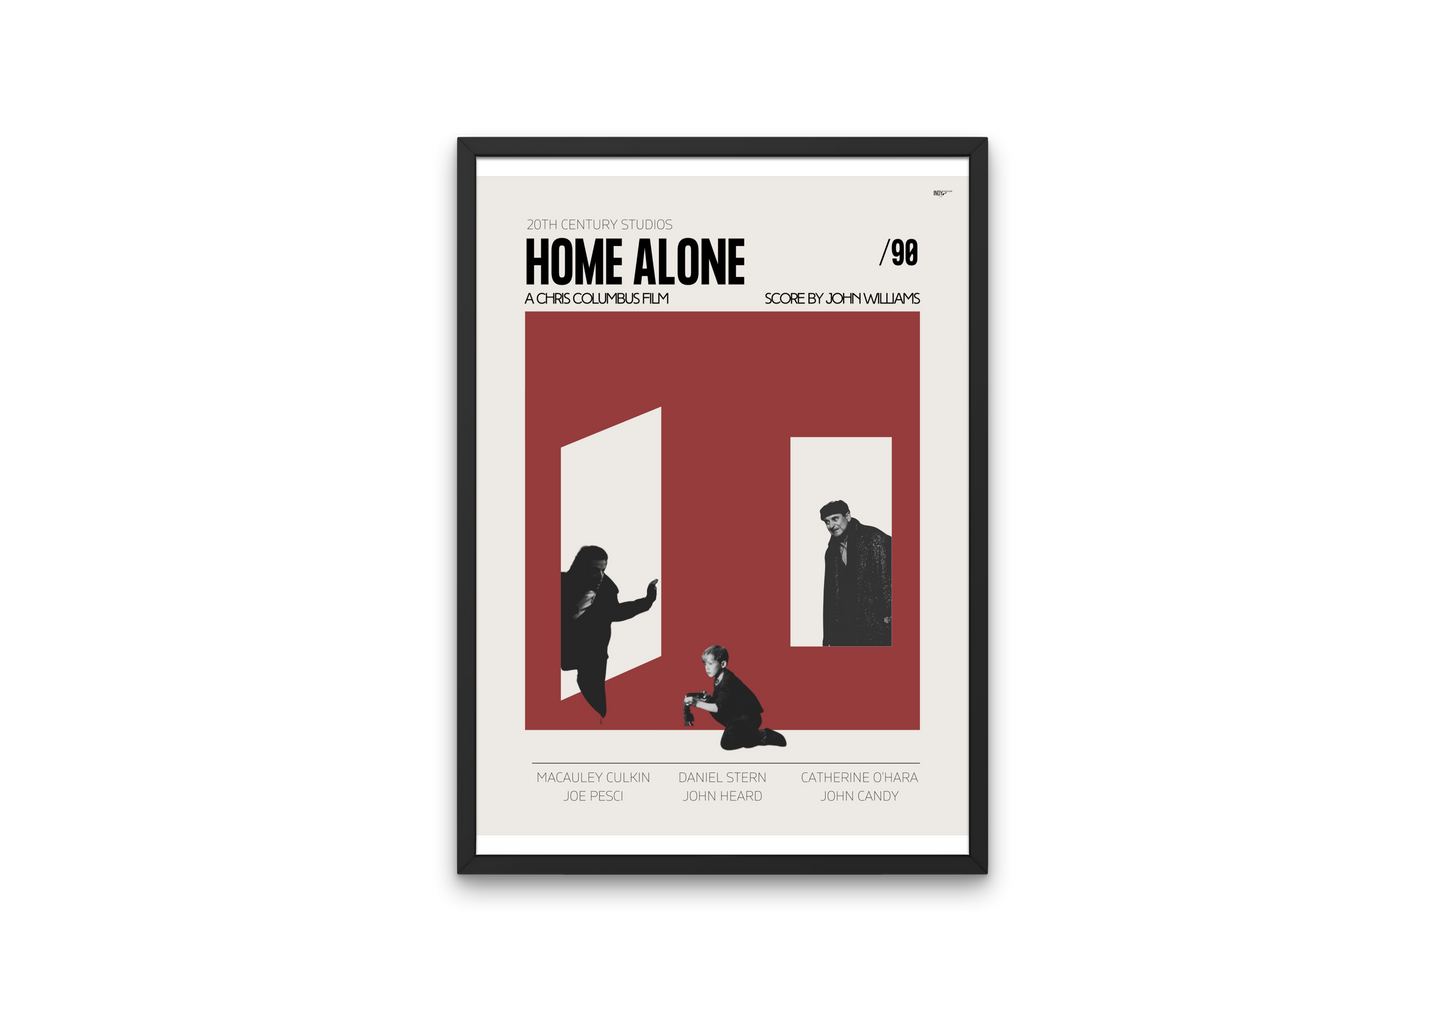 "Home Alone" Mid-Century Modern Film Poster